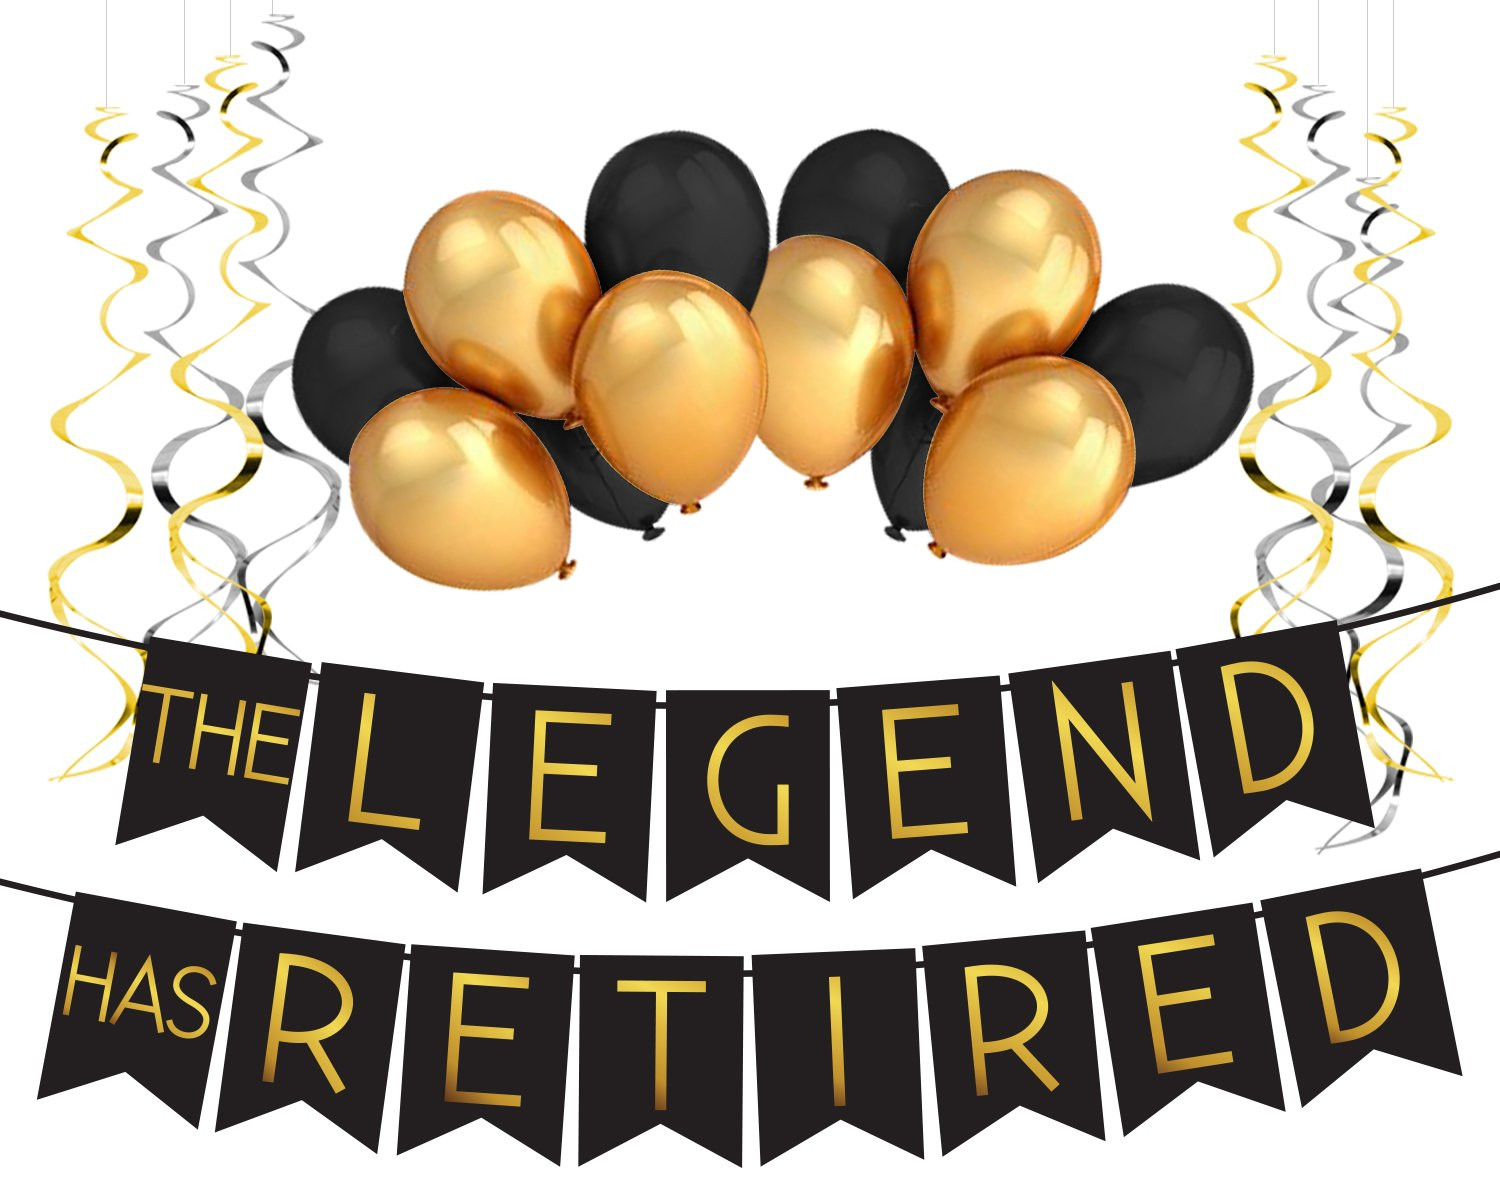 Party Ideas For Retirement
 “The Legend Has Retired” Retirement Decoration Pack